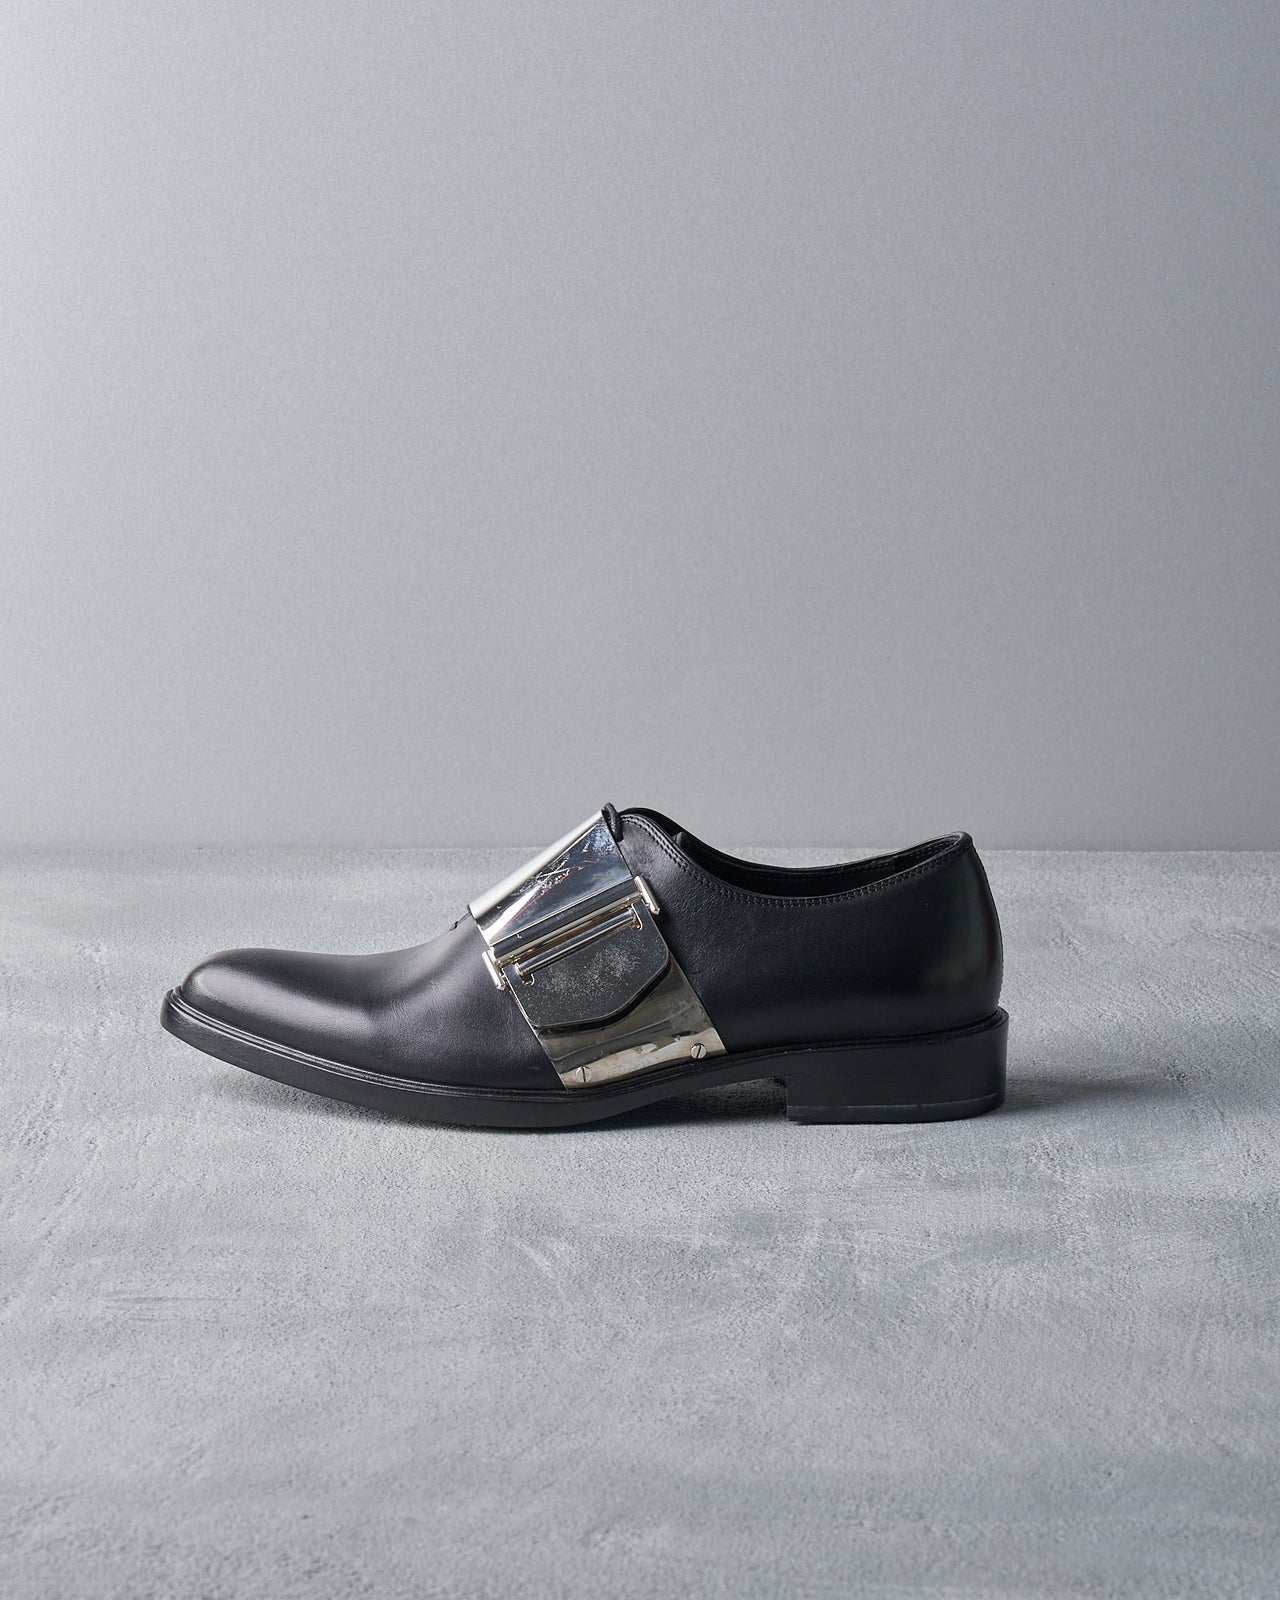 Givenchy FW 2013 Richelieu Metal Buckle Leather Shoes